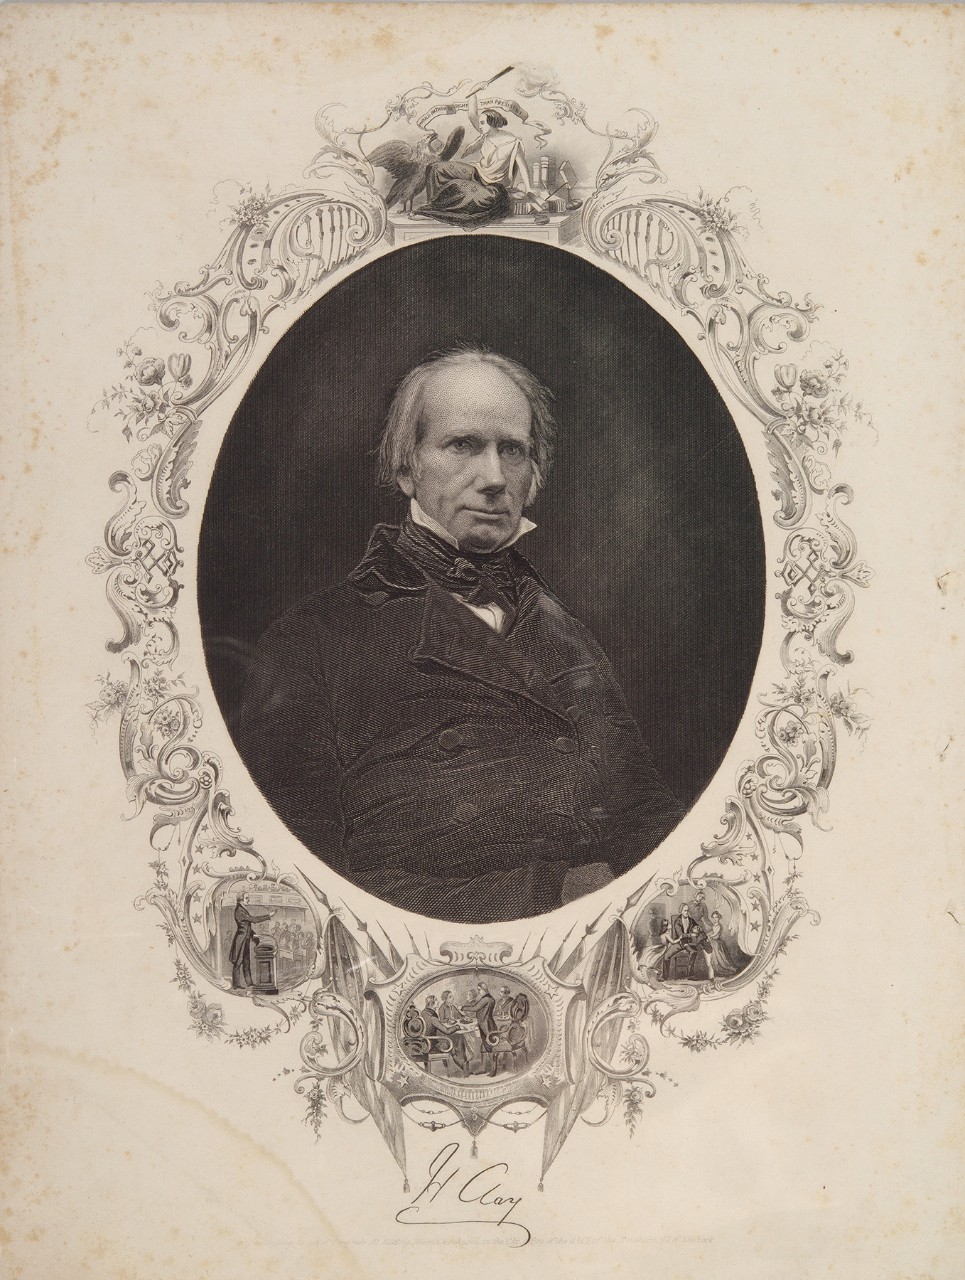 Oval portrait of Henry Clay with a boarder 